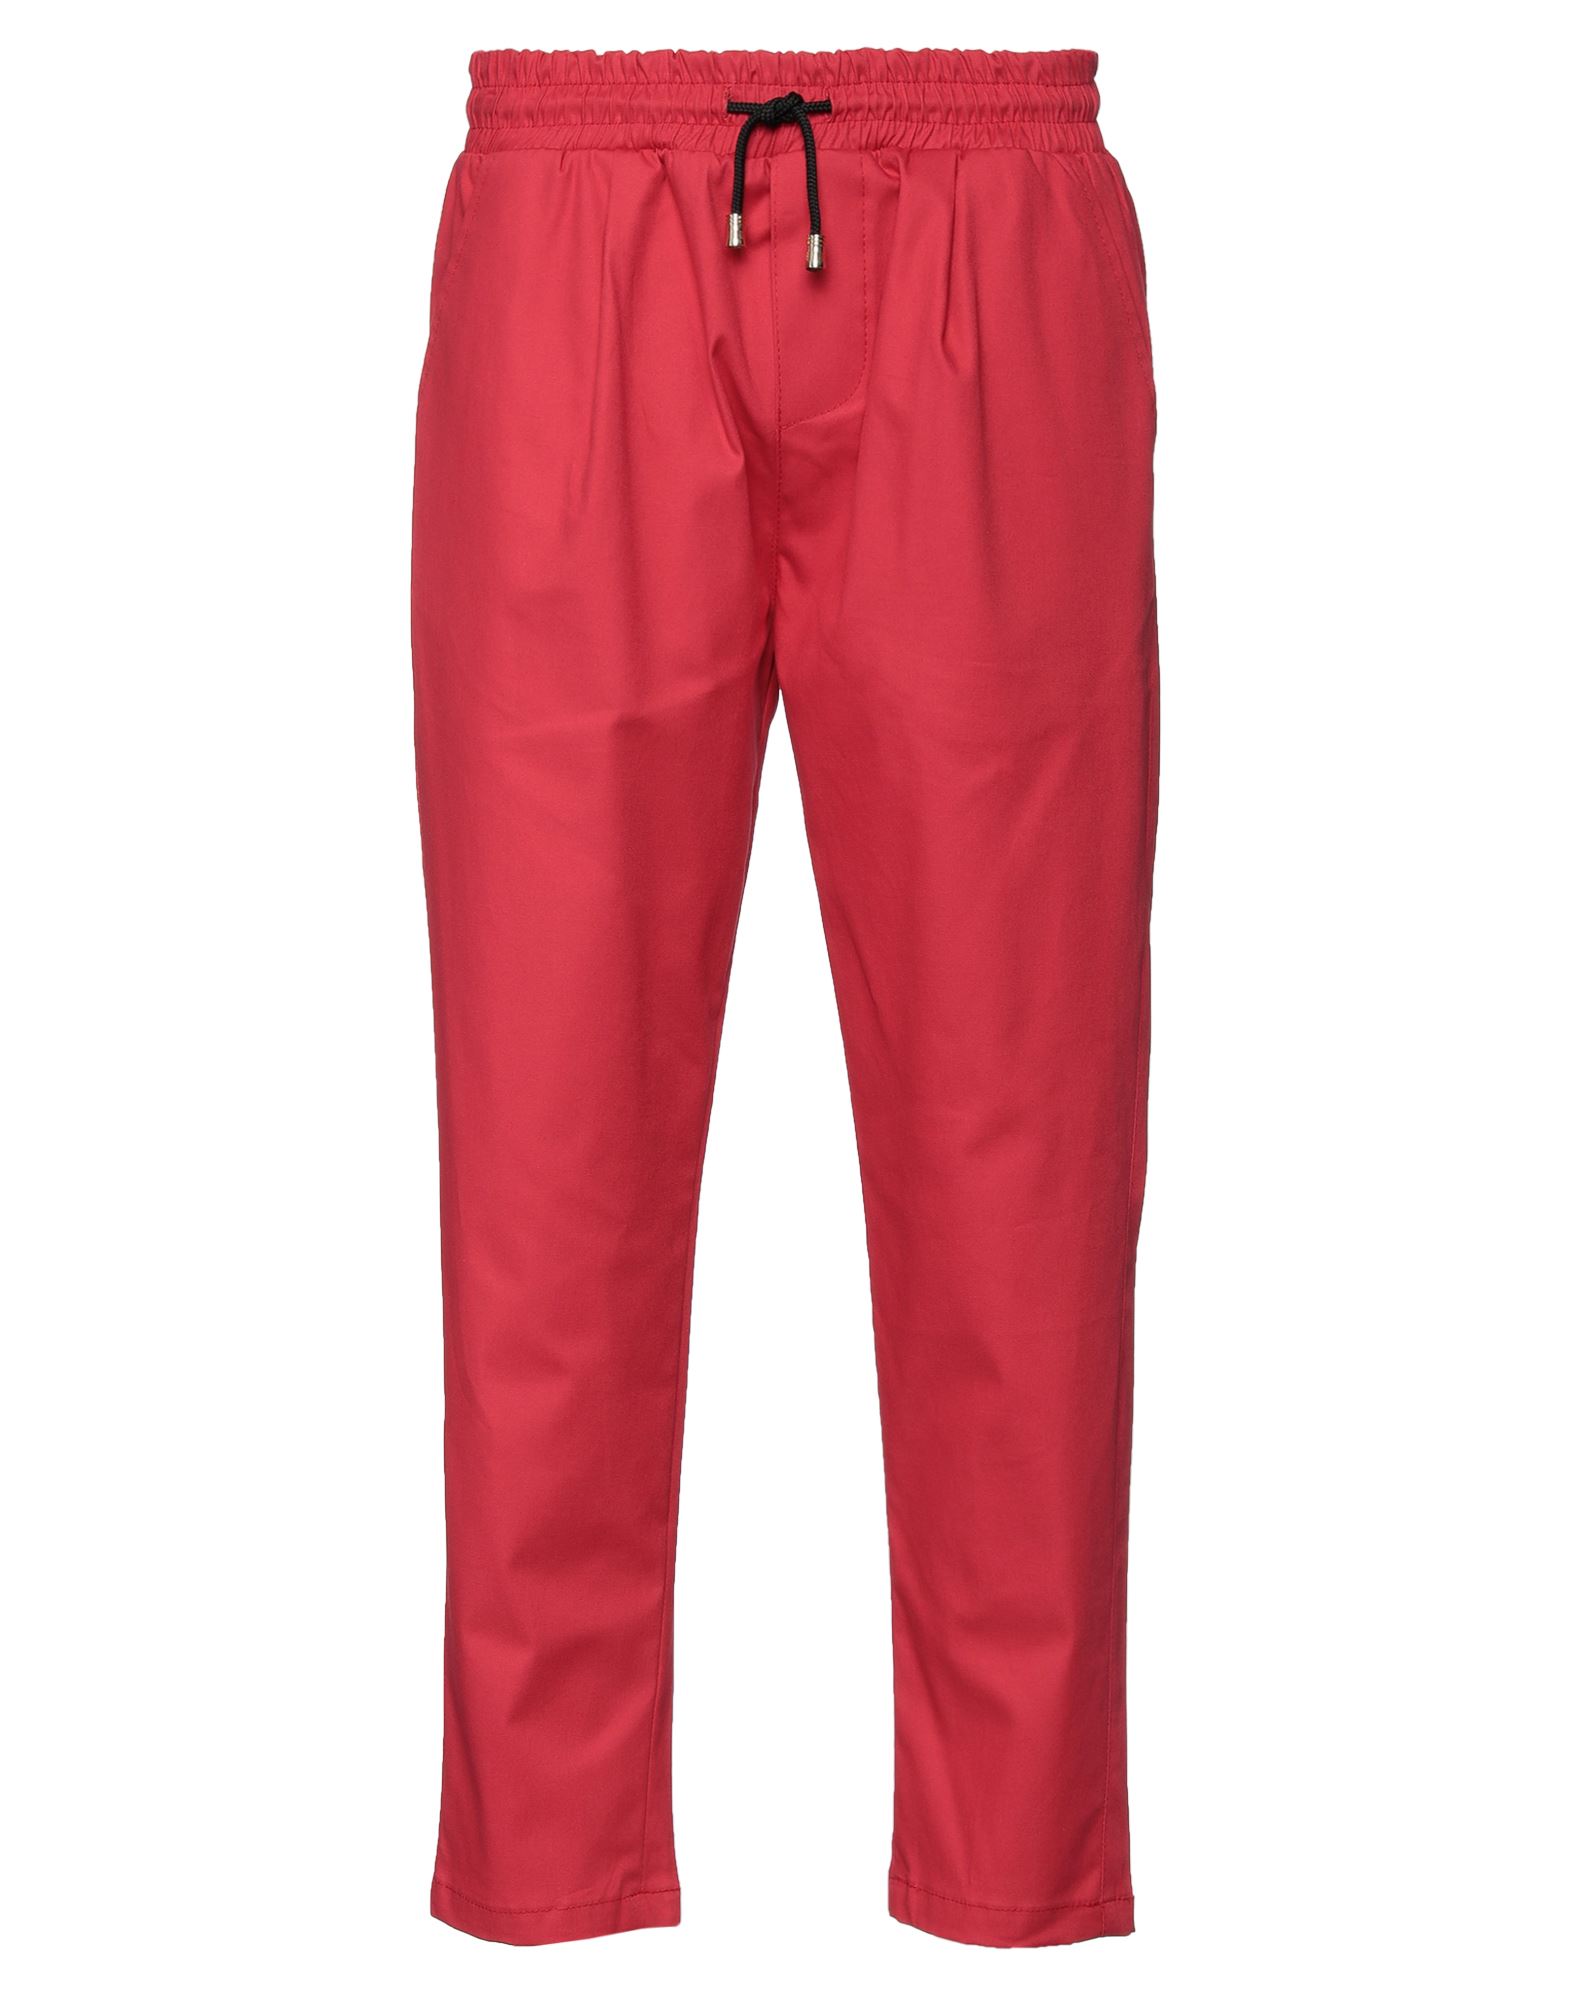 Adriano Langella Pants In Red